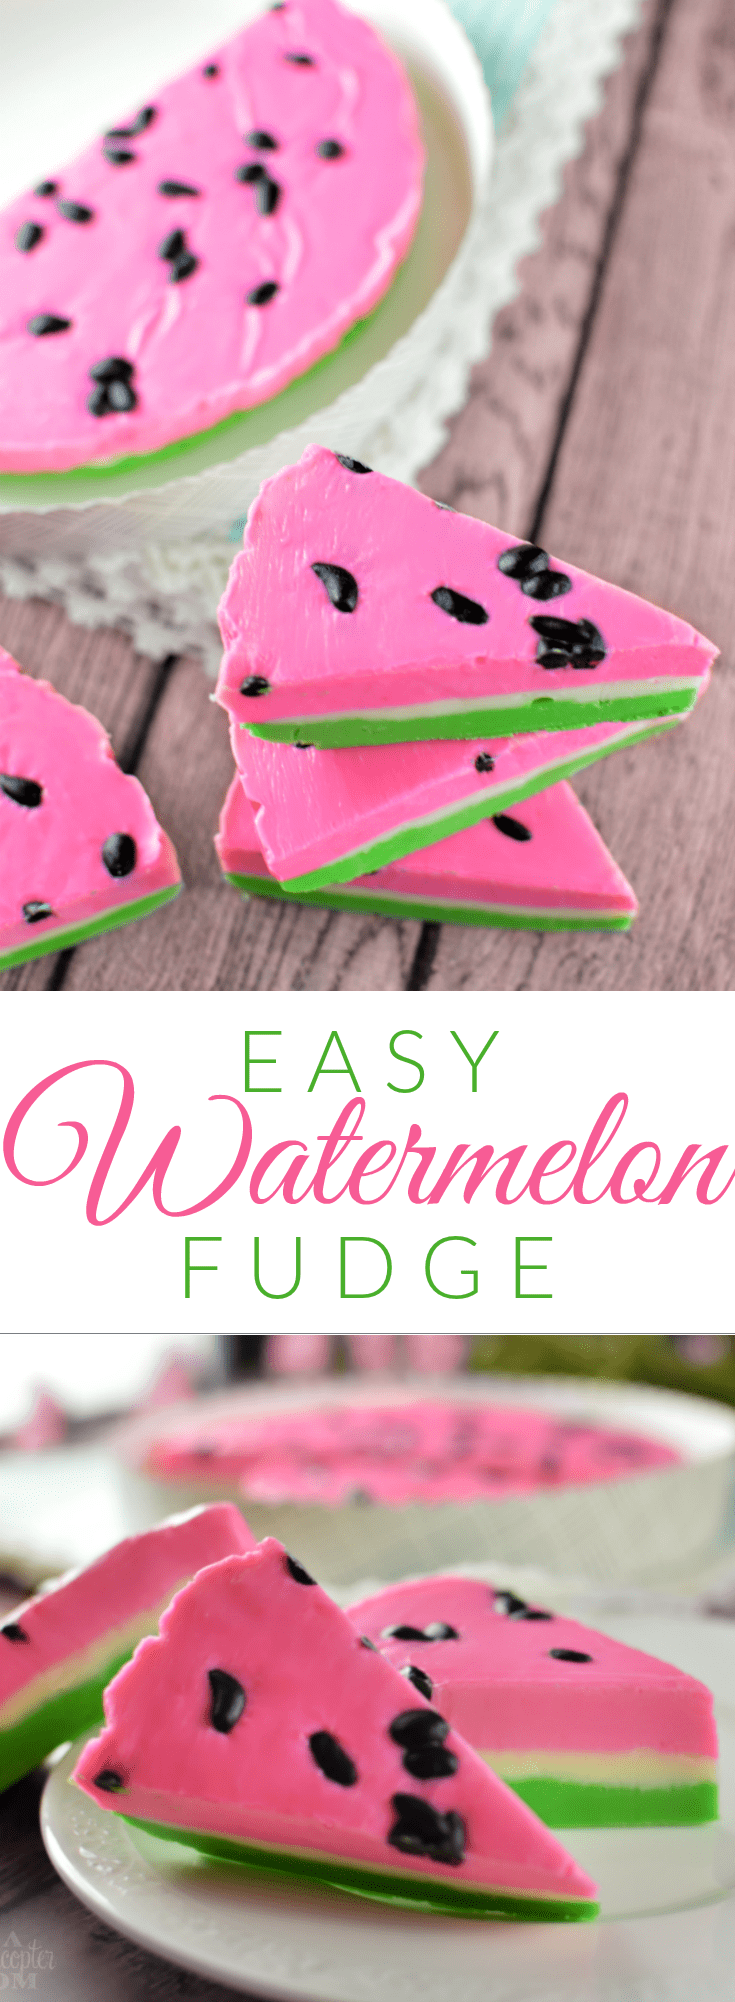 Easy Watermelon Fudge - Super simple to make, tastes amazing and is SO cute! Perfect for summer parties and cookouts!